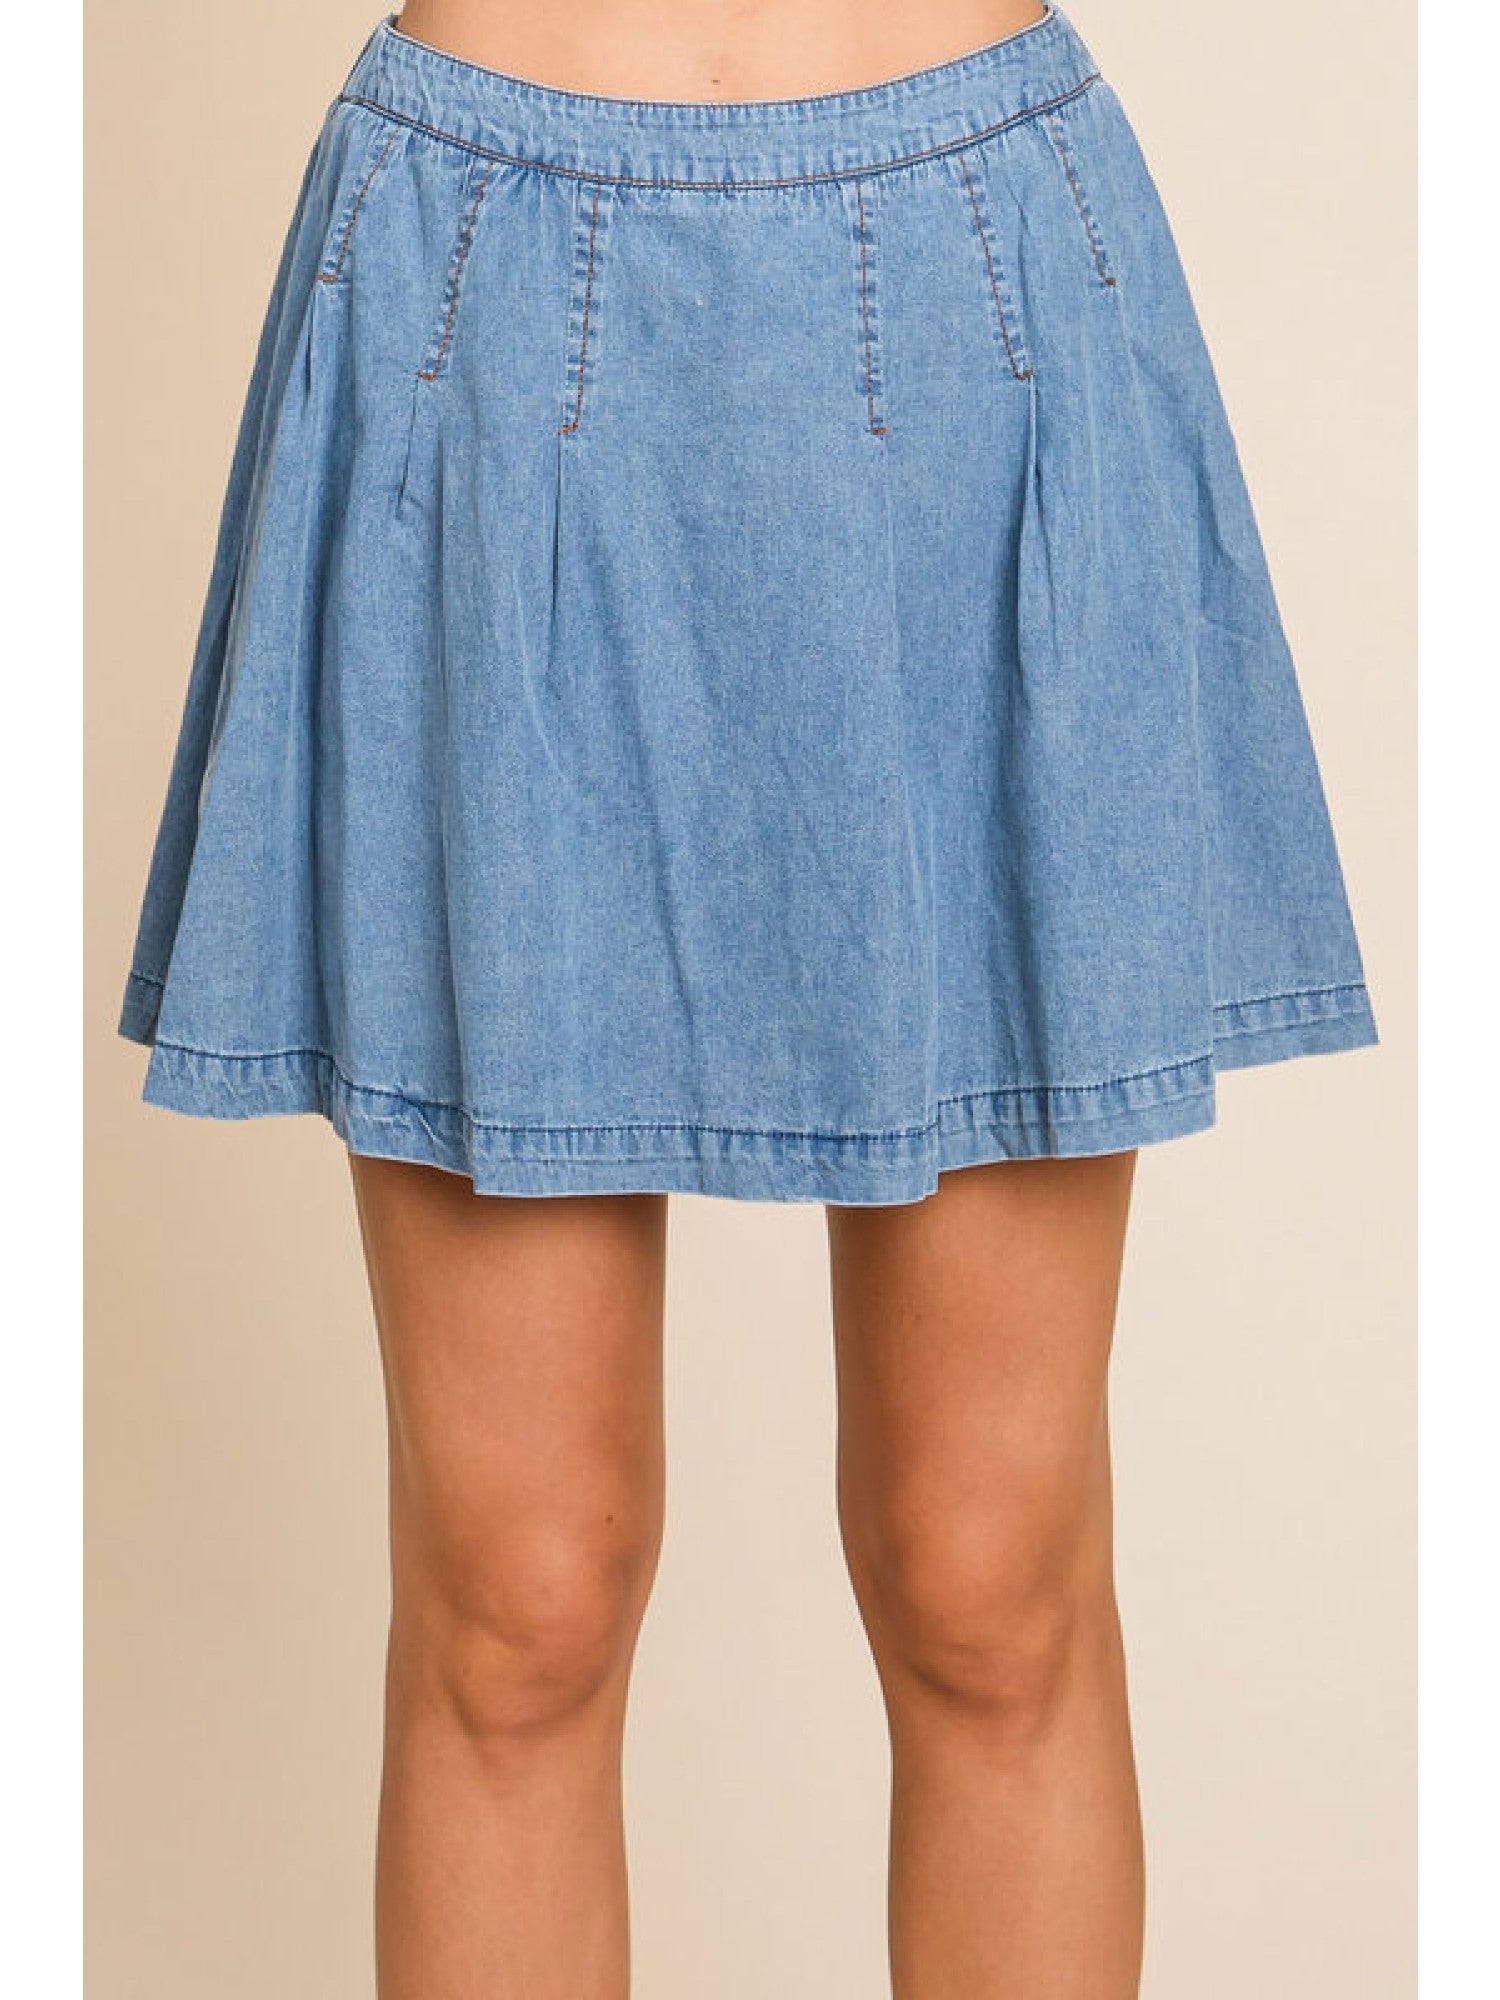 Southern Bell Skirt with Shorts